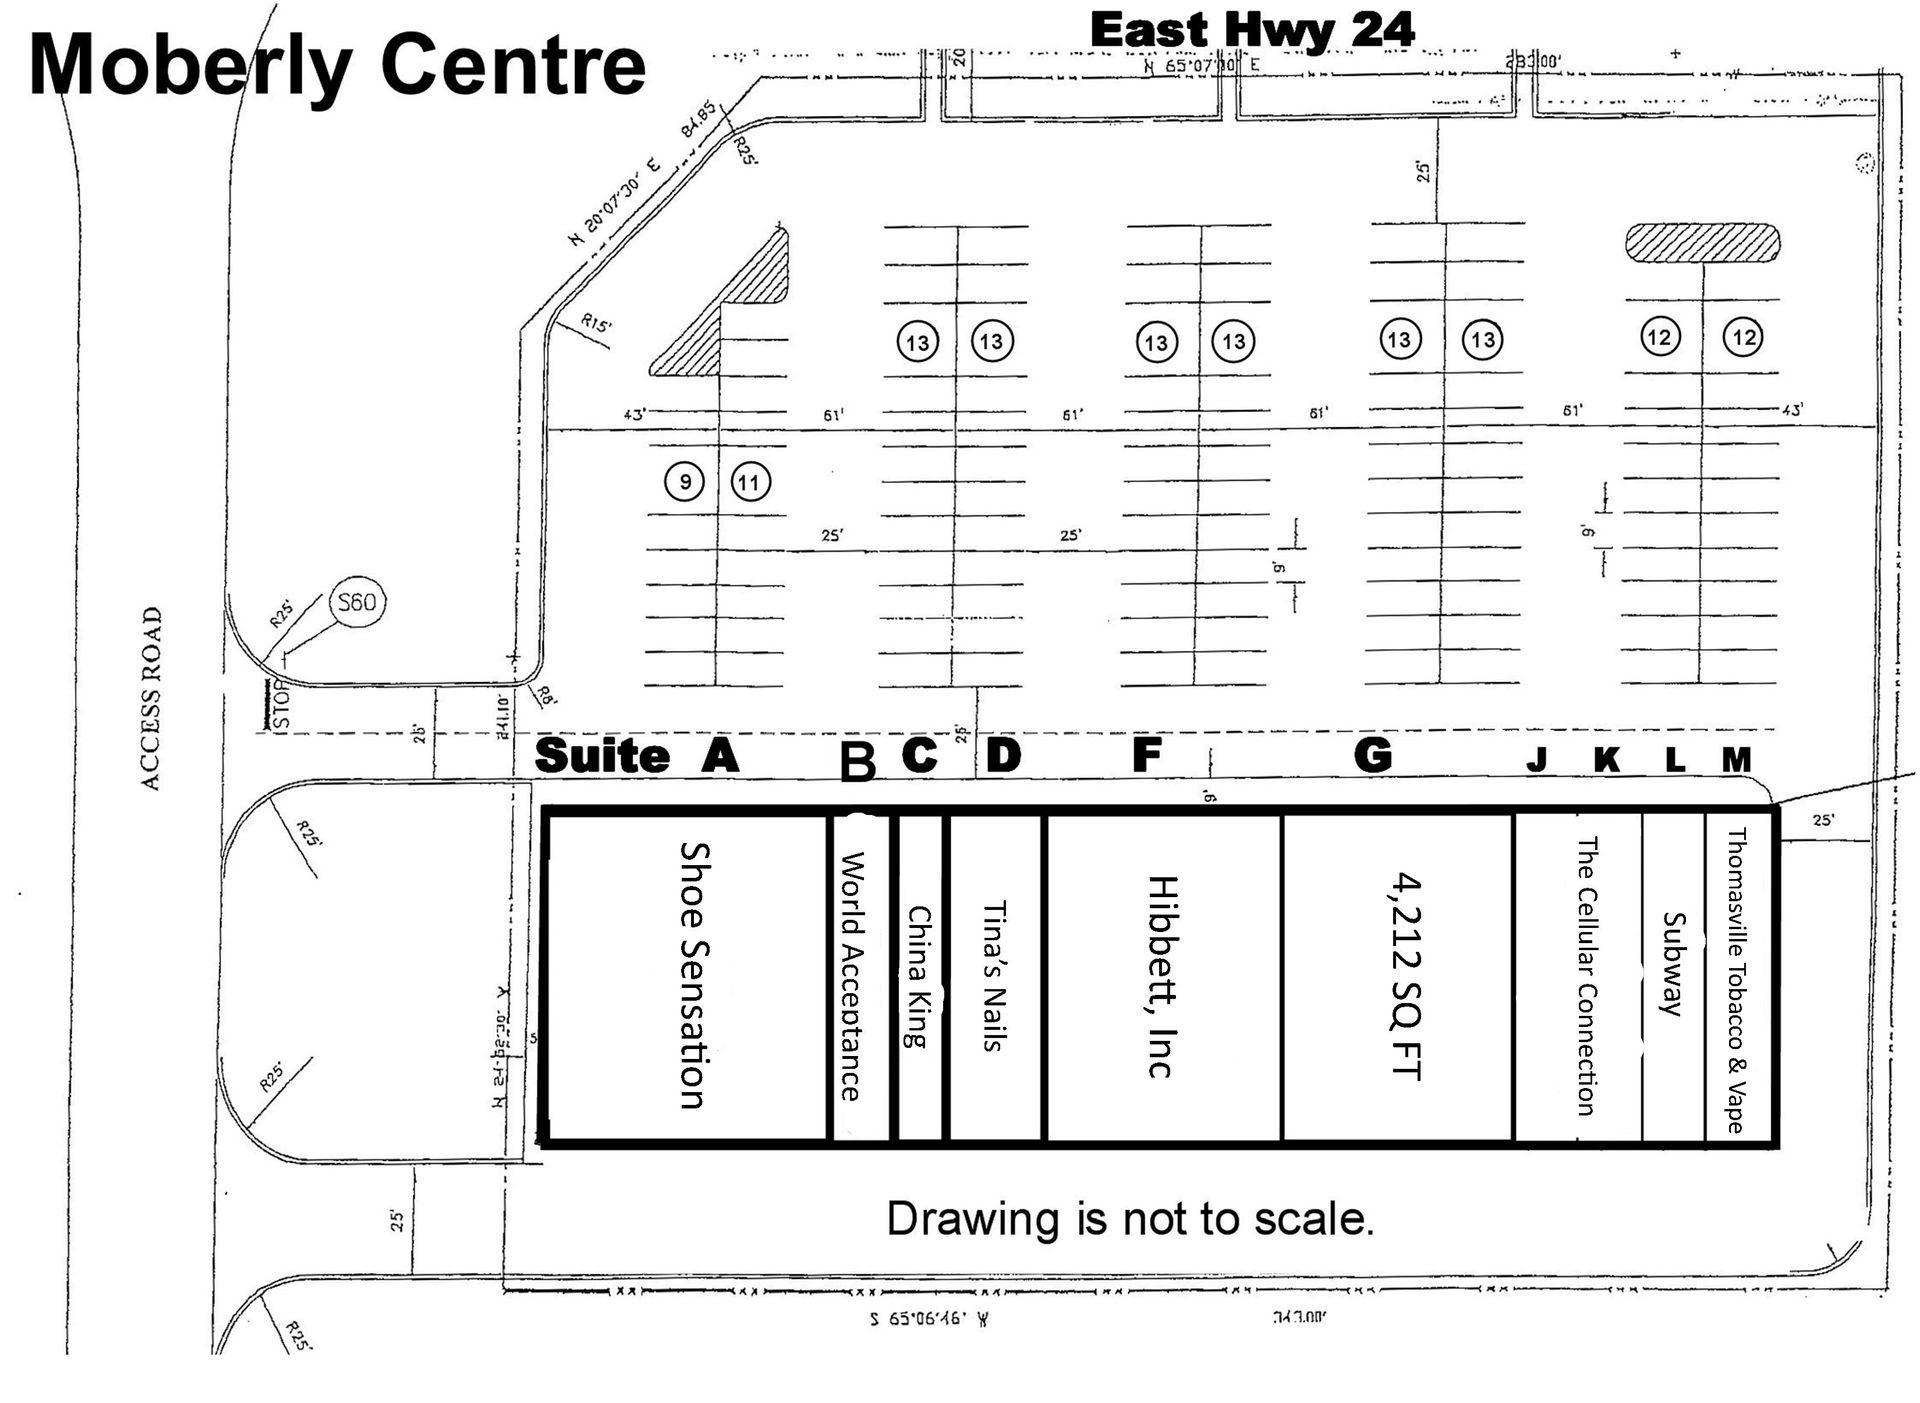 Moberly Centre Site Plan